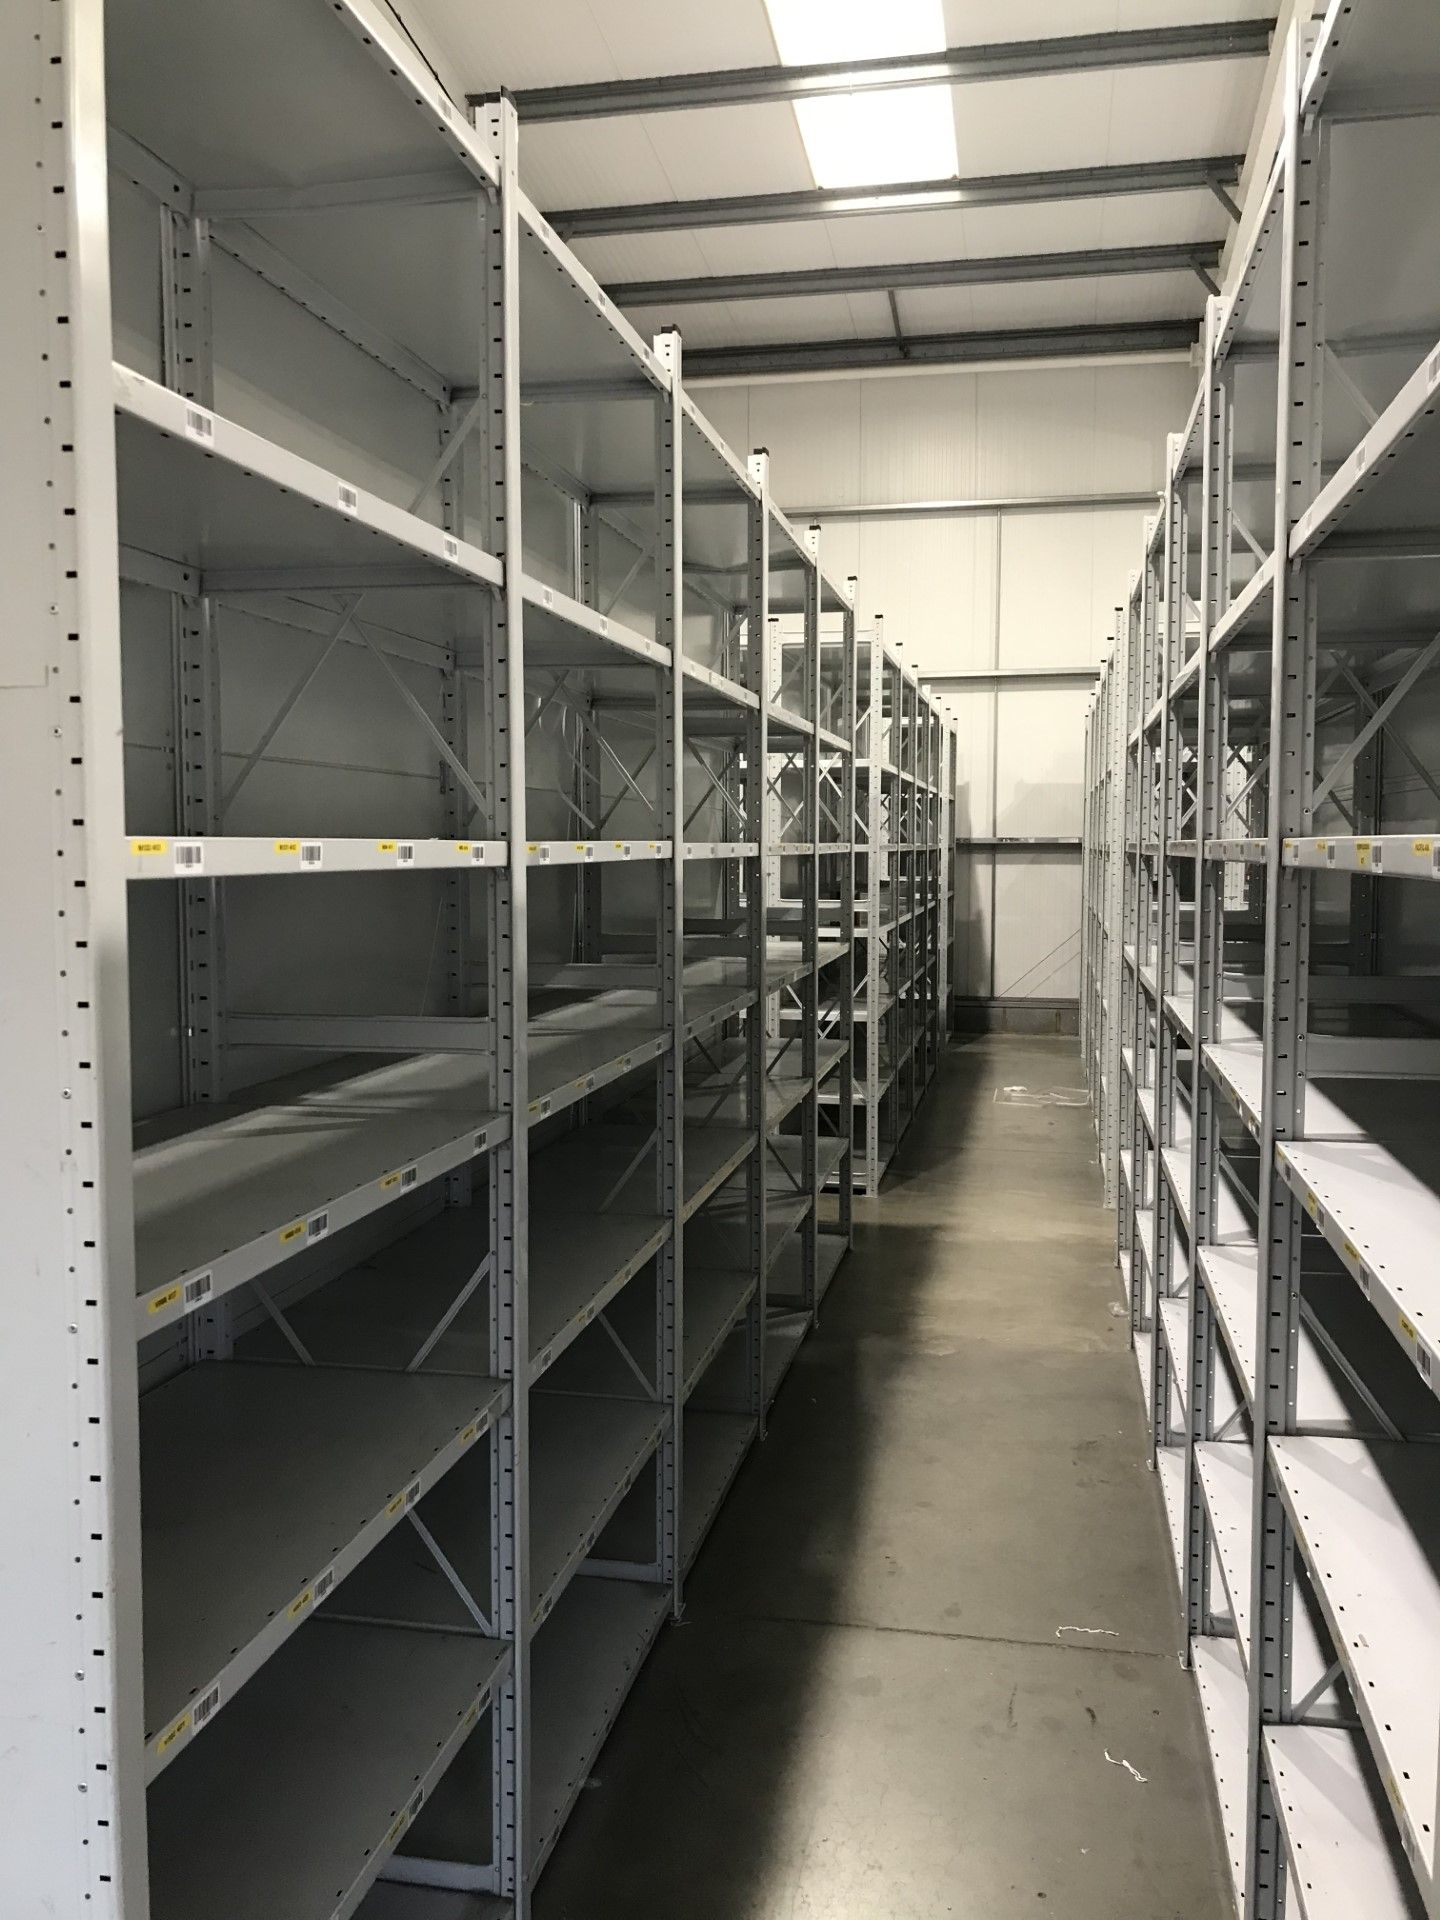 Link 51 racking – less than 5 years old installed new Aug 2019 - Image 6 of 7